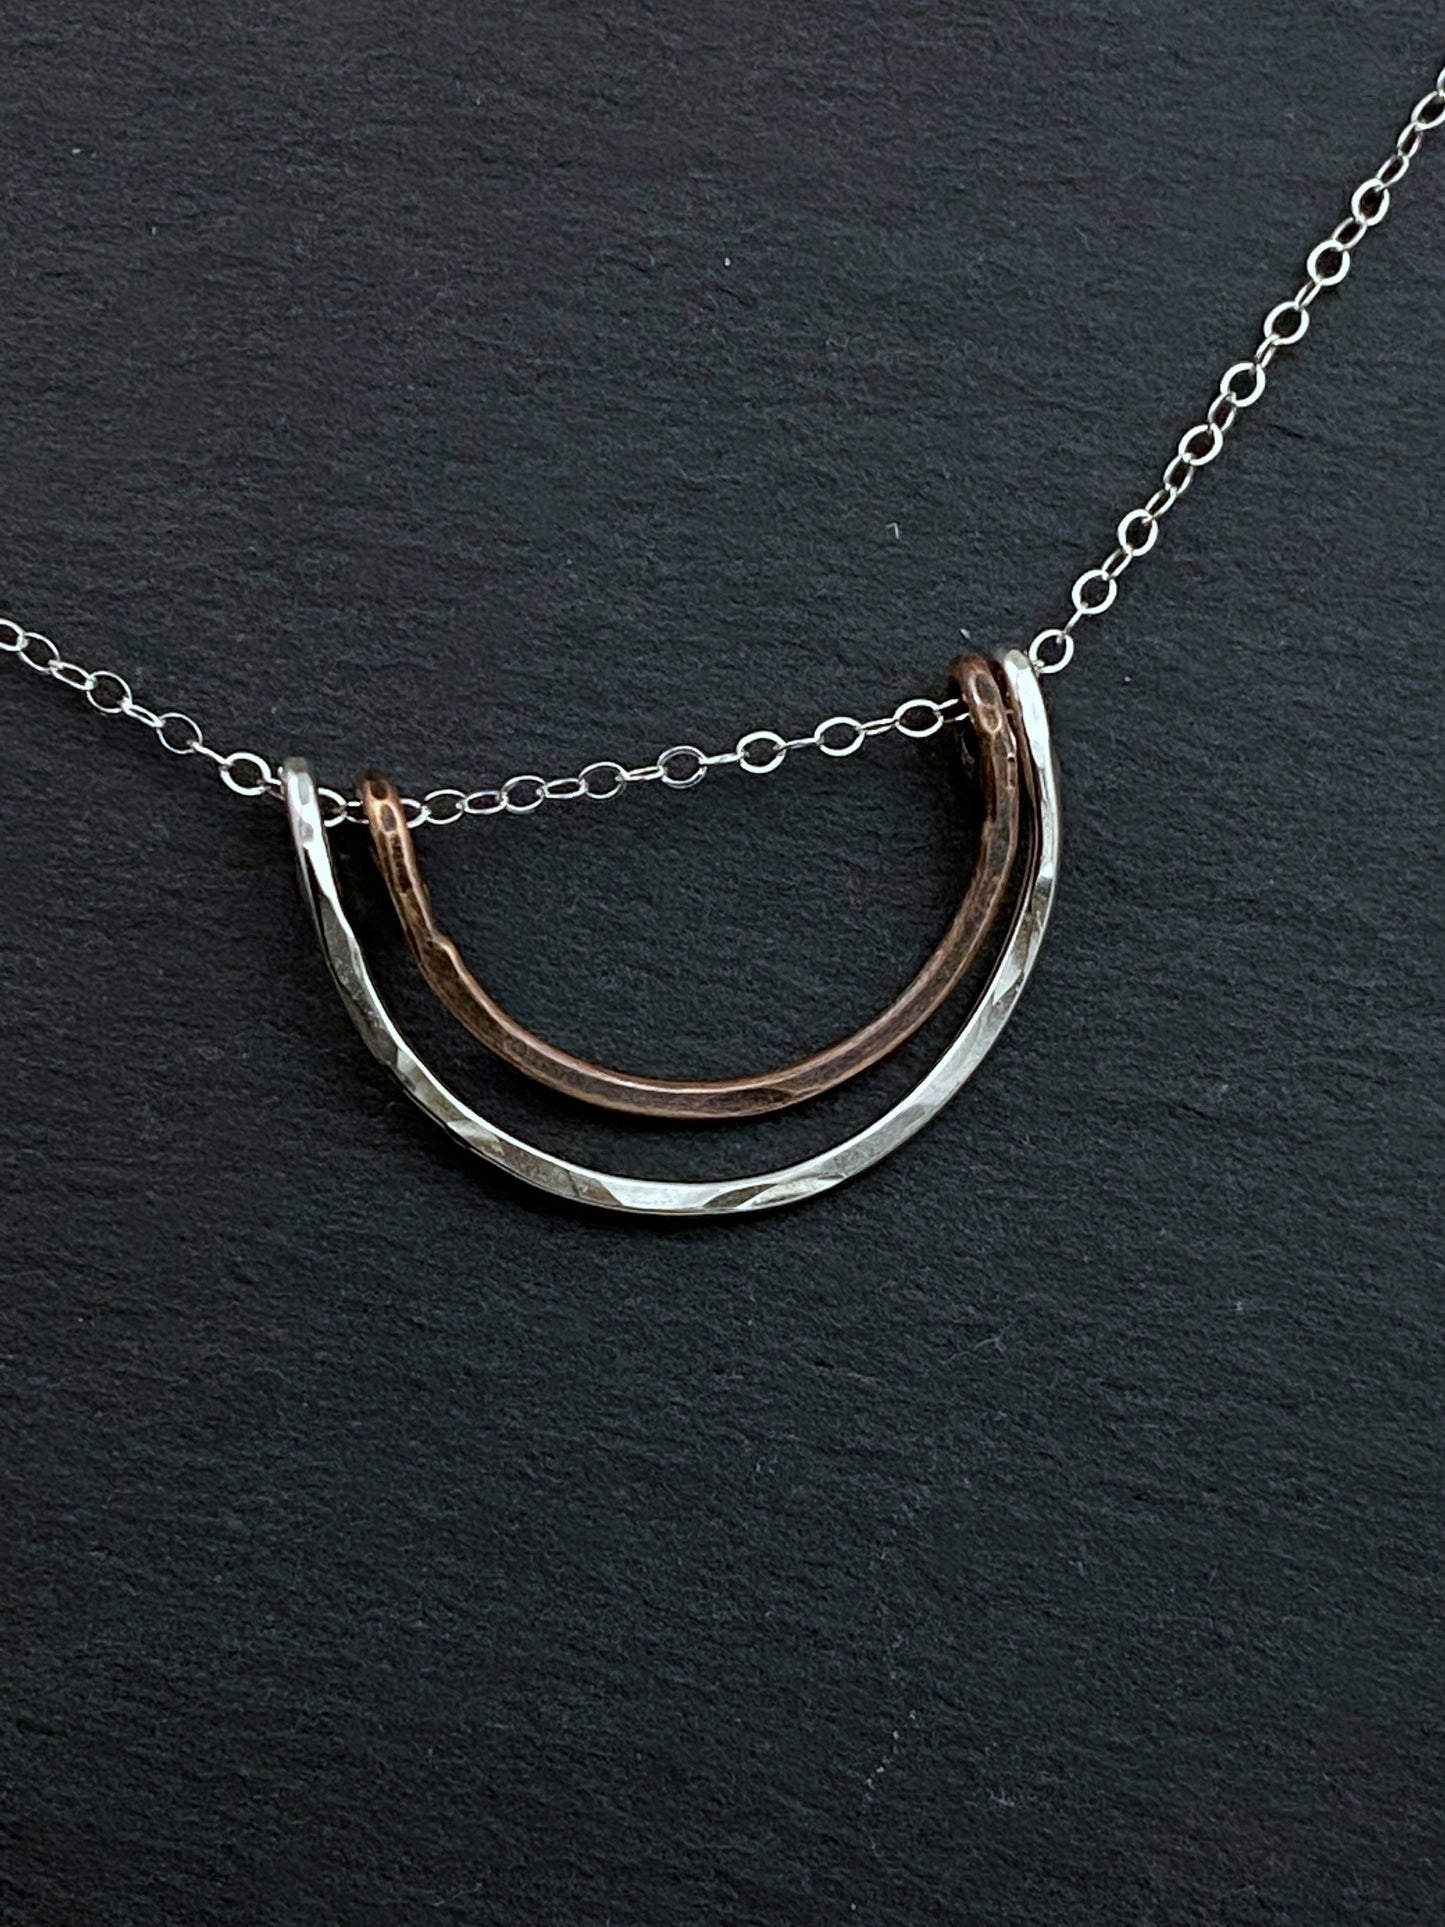 Forged sterling silver & copper wire half moon necklace